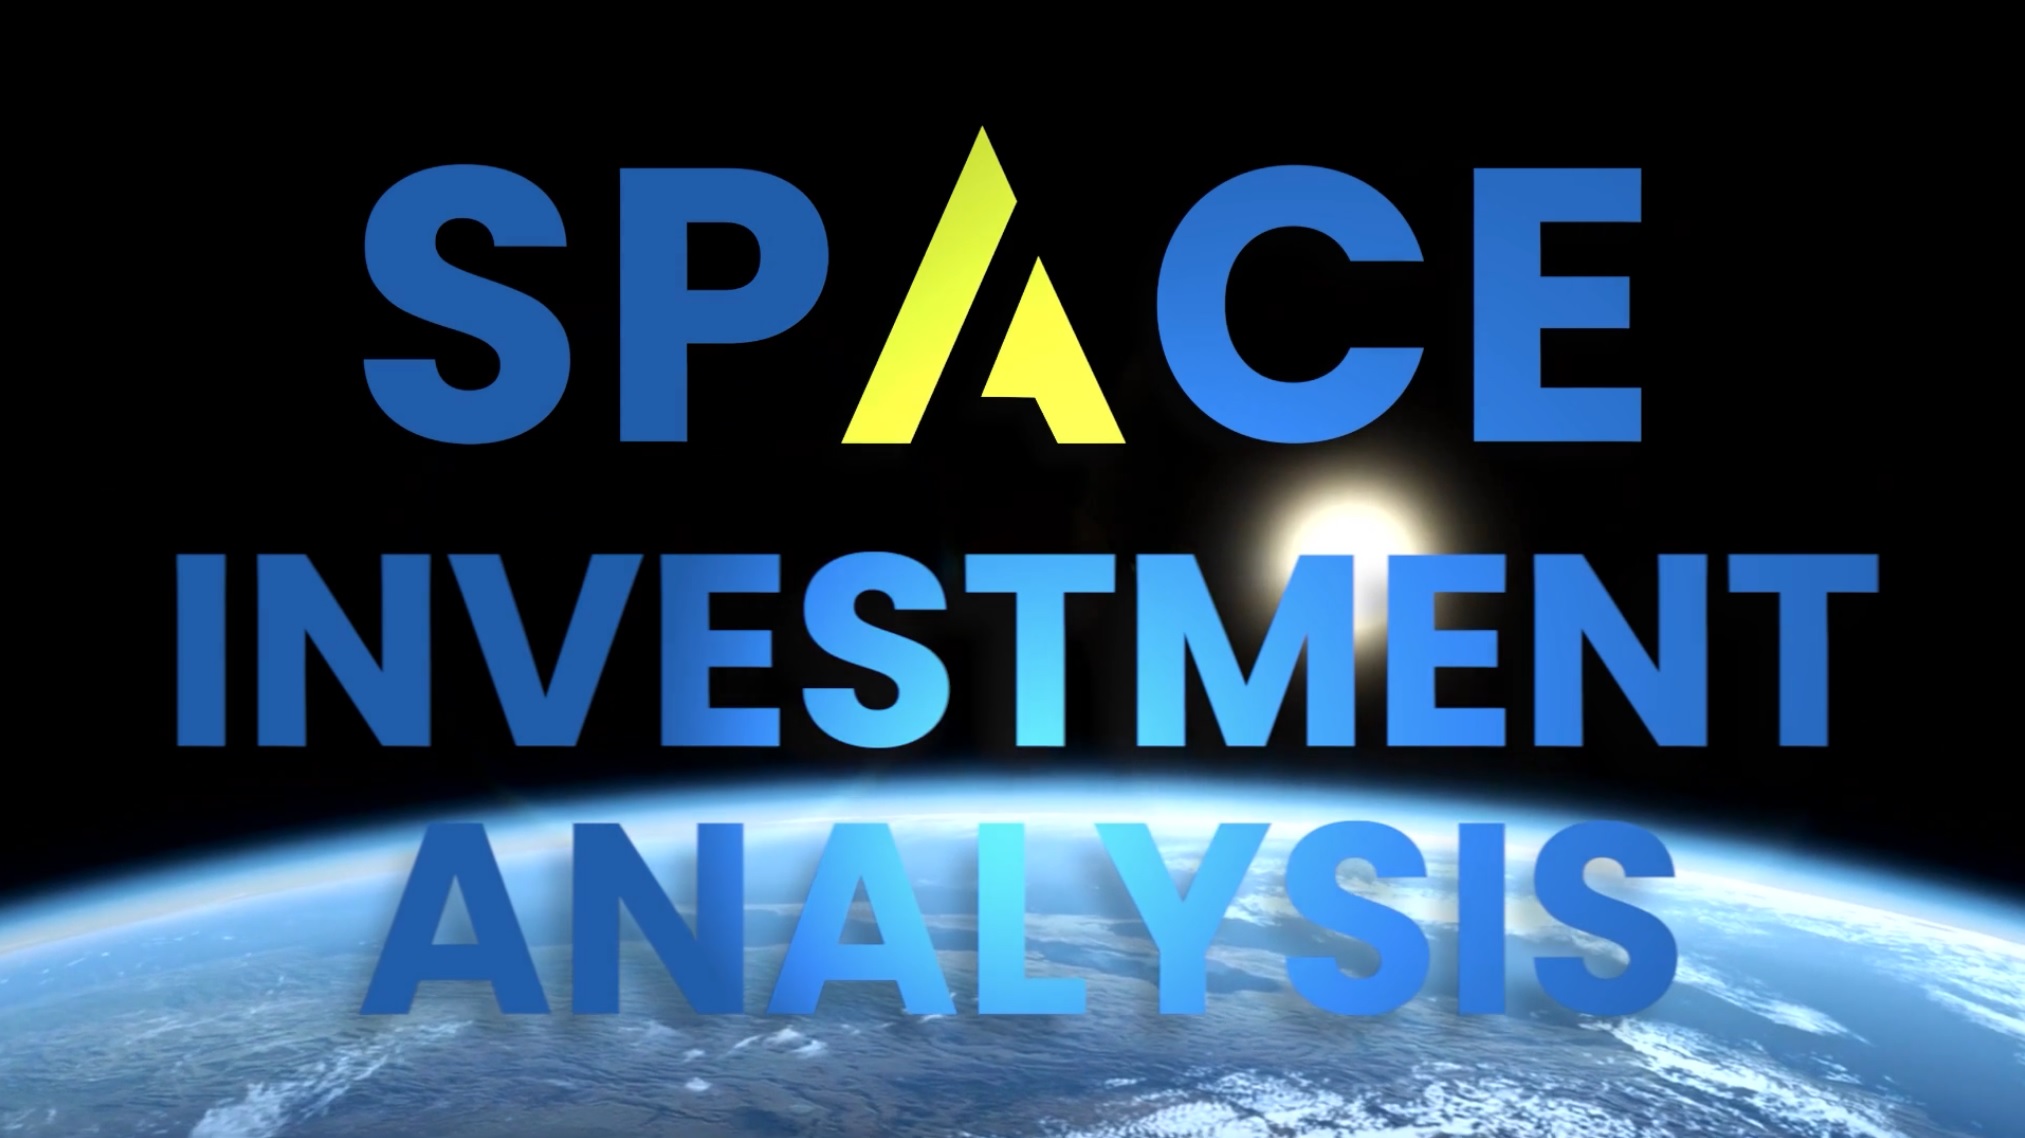 This quarterly investment panel discussion details the most recent merger and acquisition activity, investment news, and key government and commercial developments shaping the space industry.